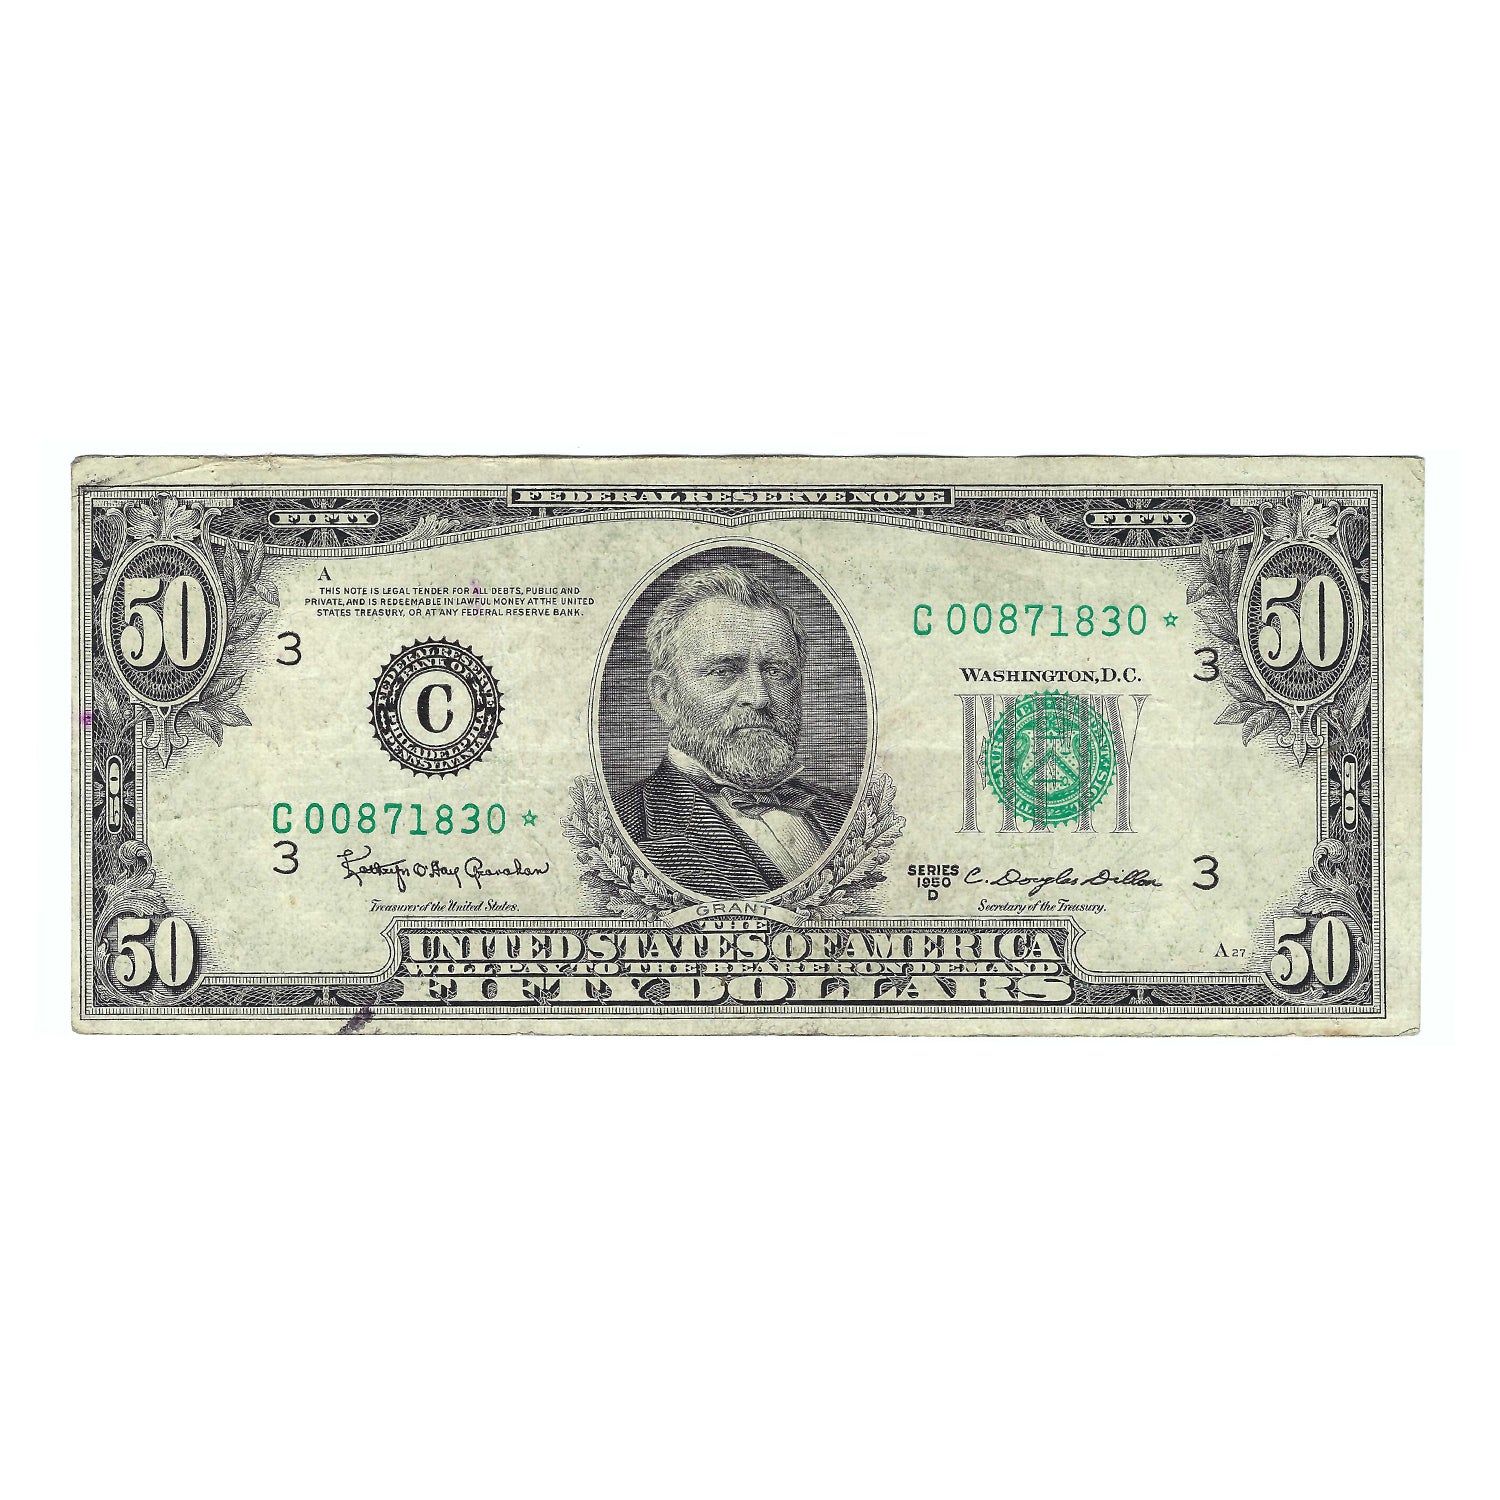 1950-D $50 Small Size Federal Reserve Star Note, Granahan-Dillon, Circulated Condition